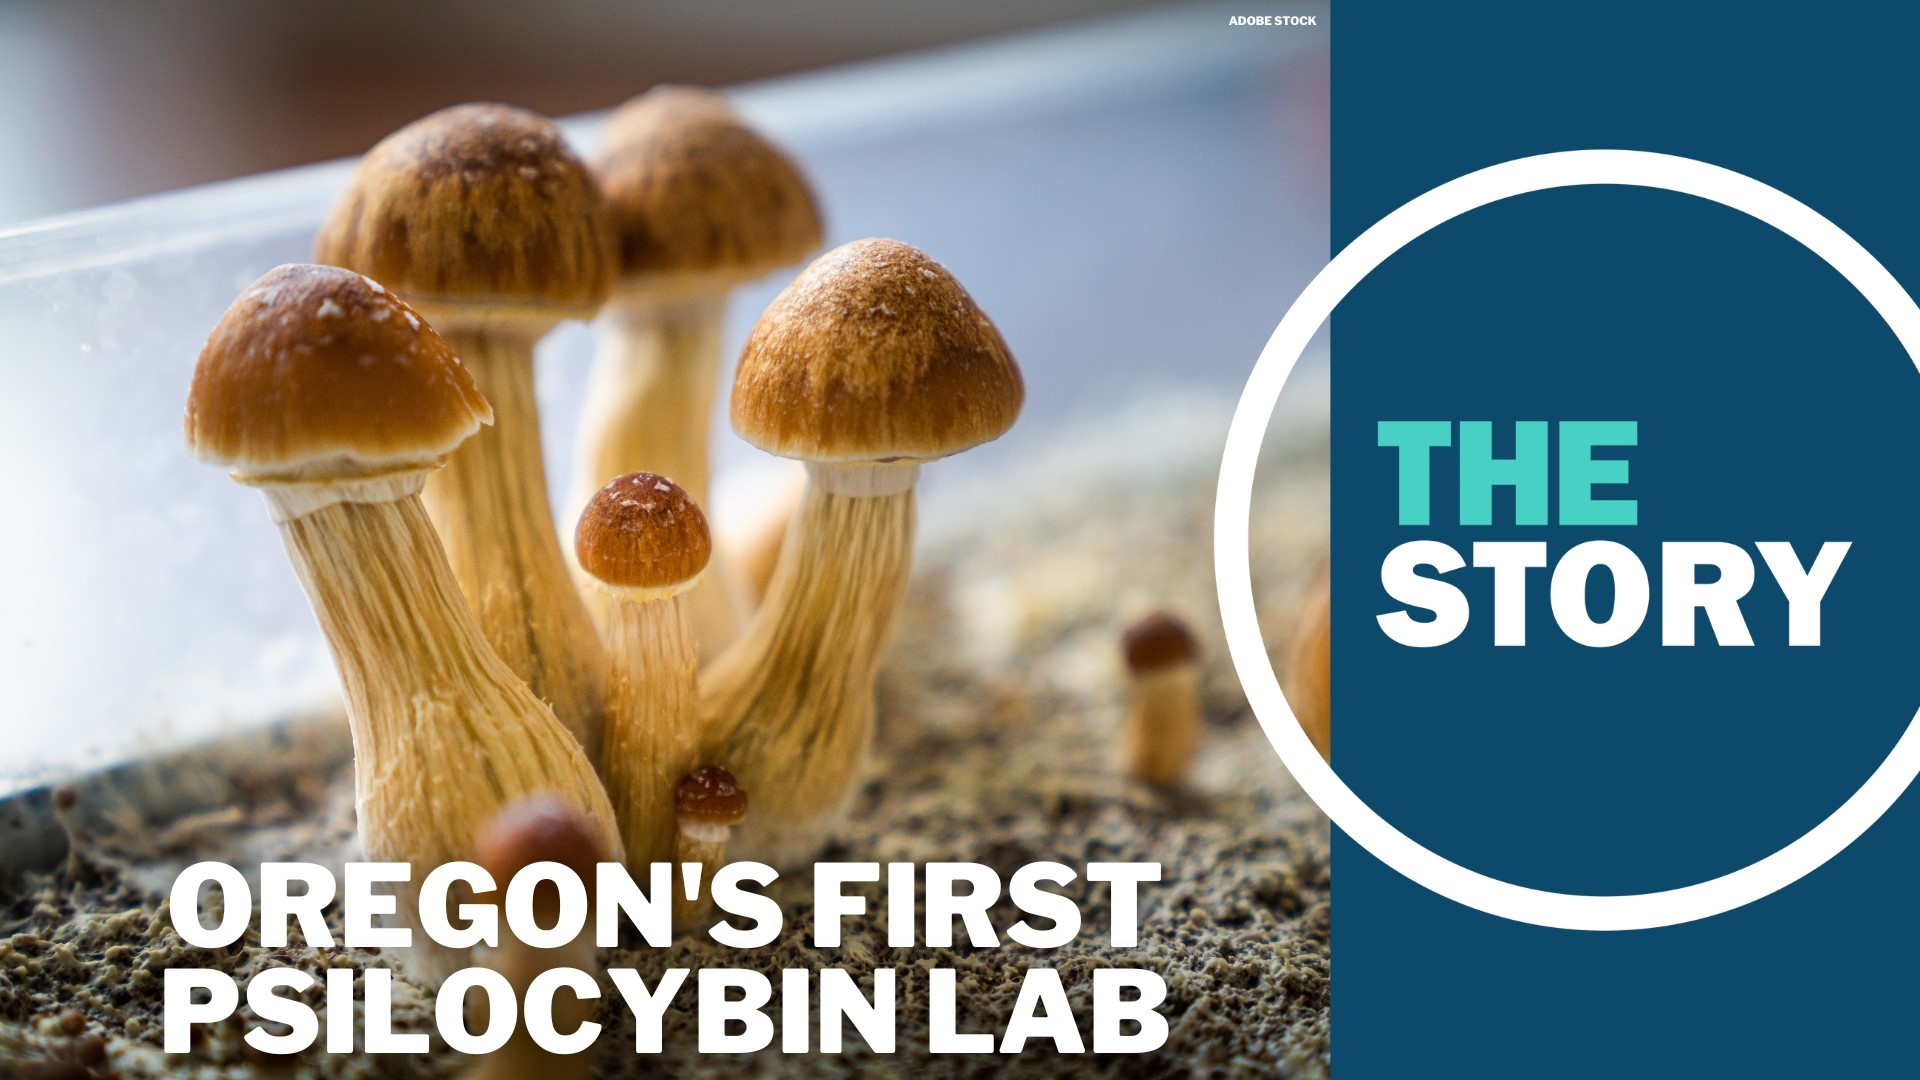 Rose City Laboratories will test the mushrooms submitted by growers, confirming the species and determining potency. The psilocybin goes on to service centers.